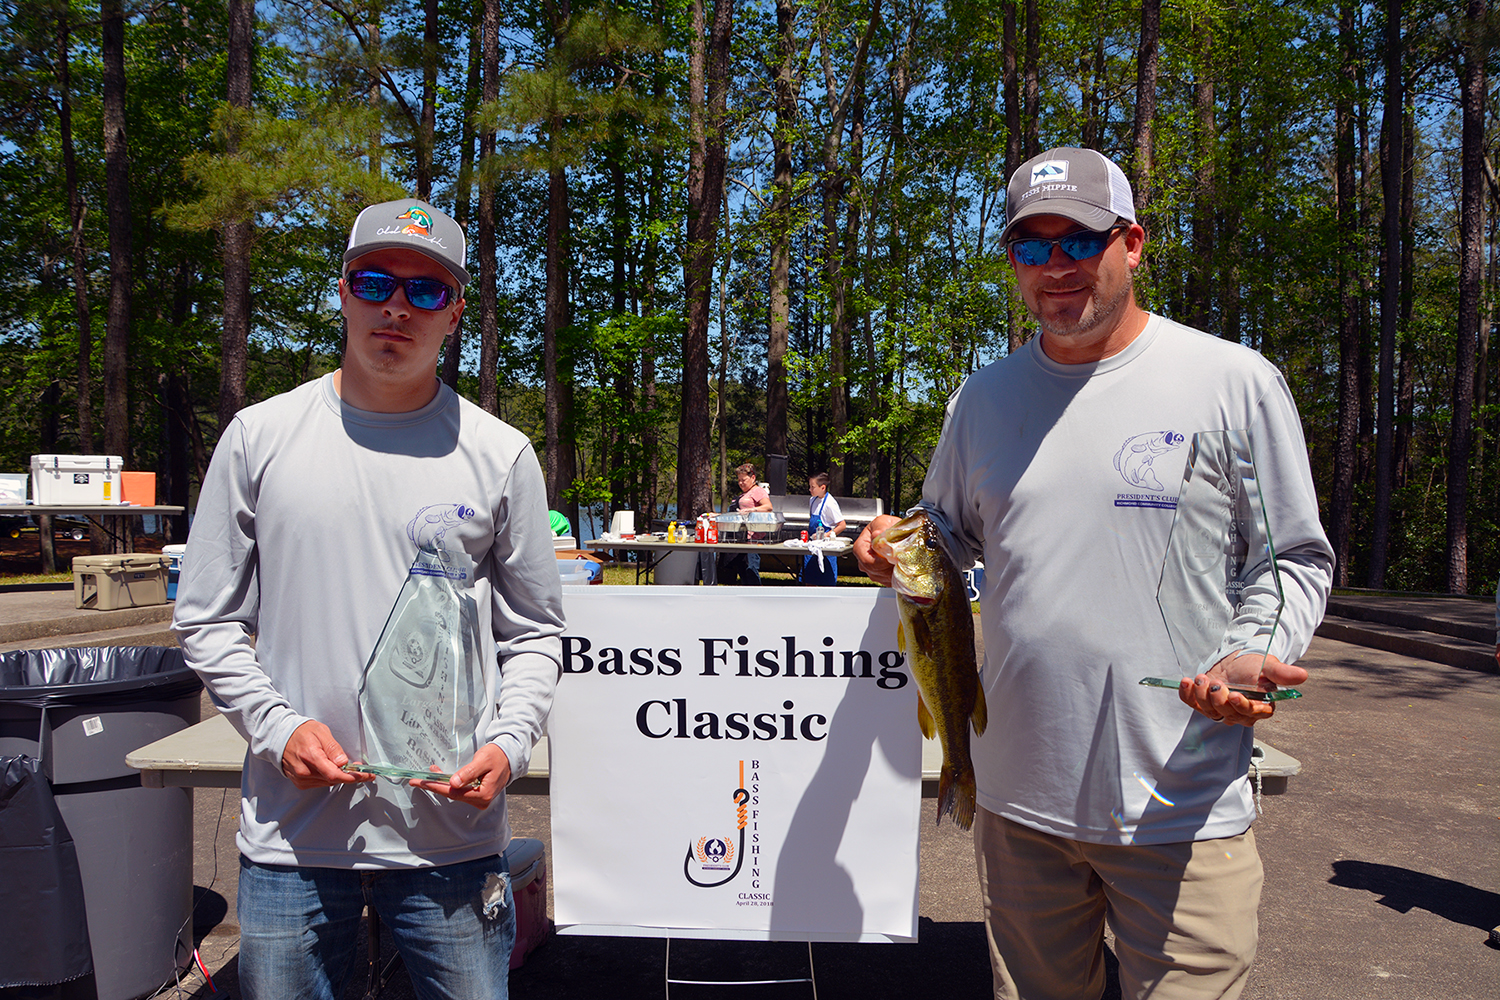 The winners of the Bass Fishing Classic hold their trophies and the winning fish.